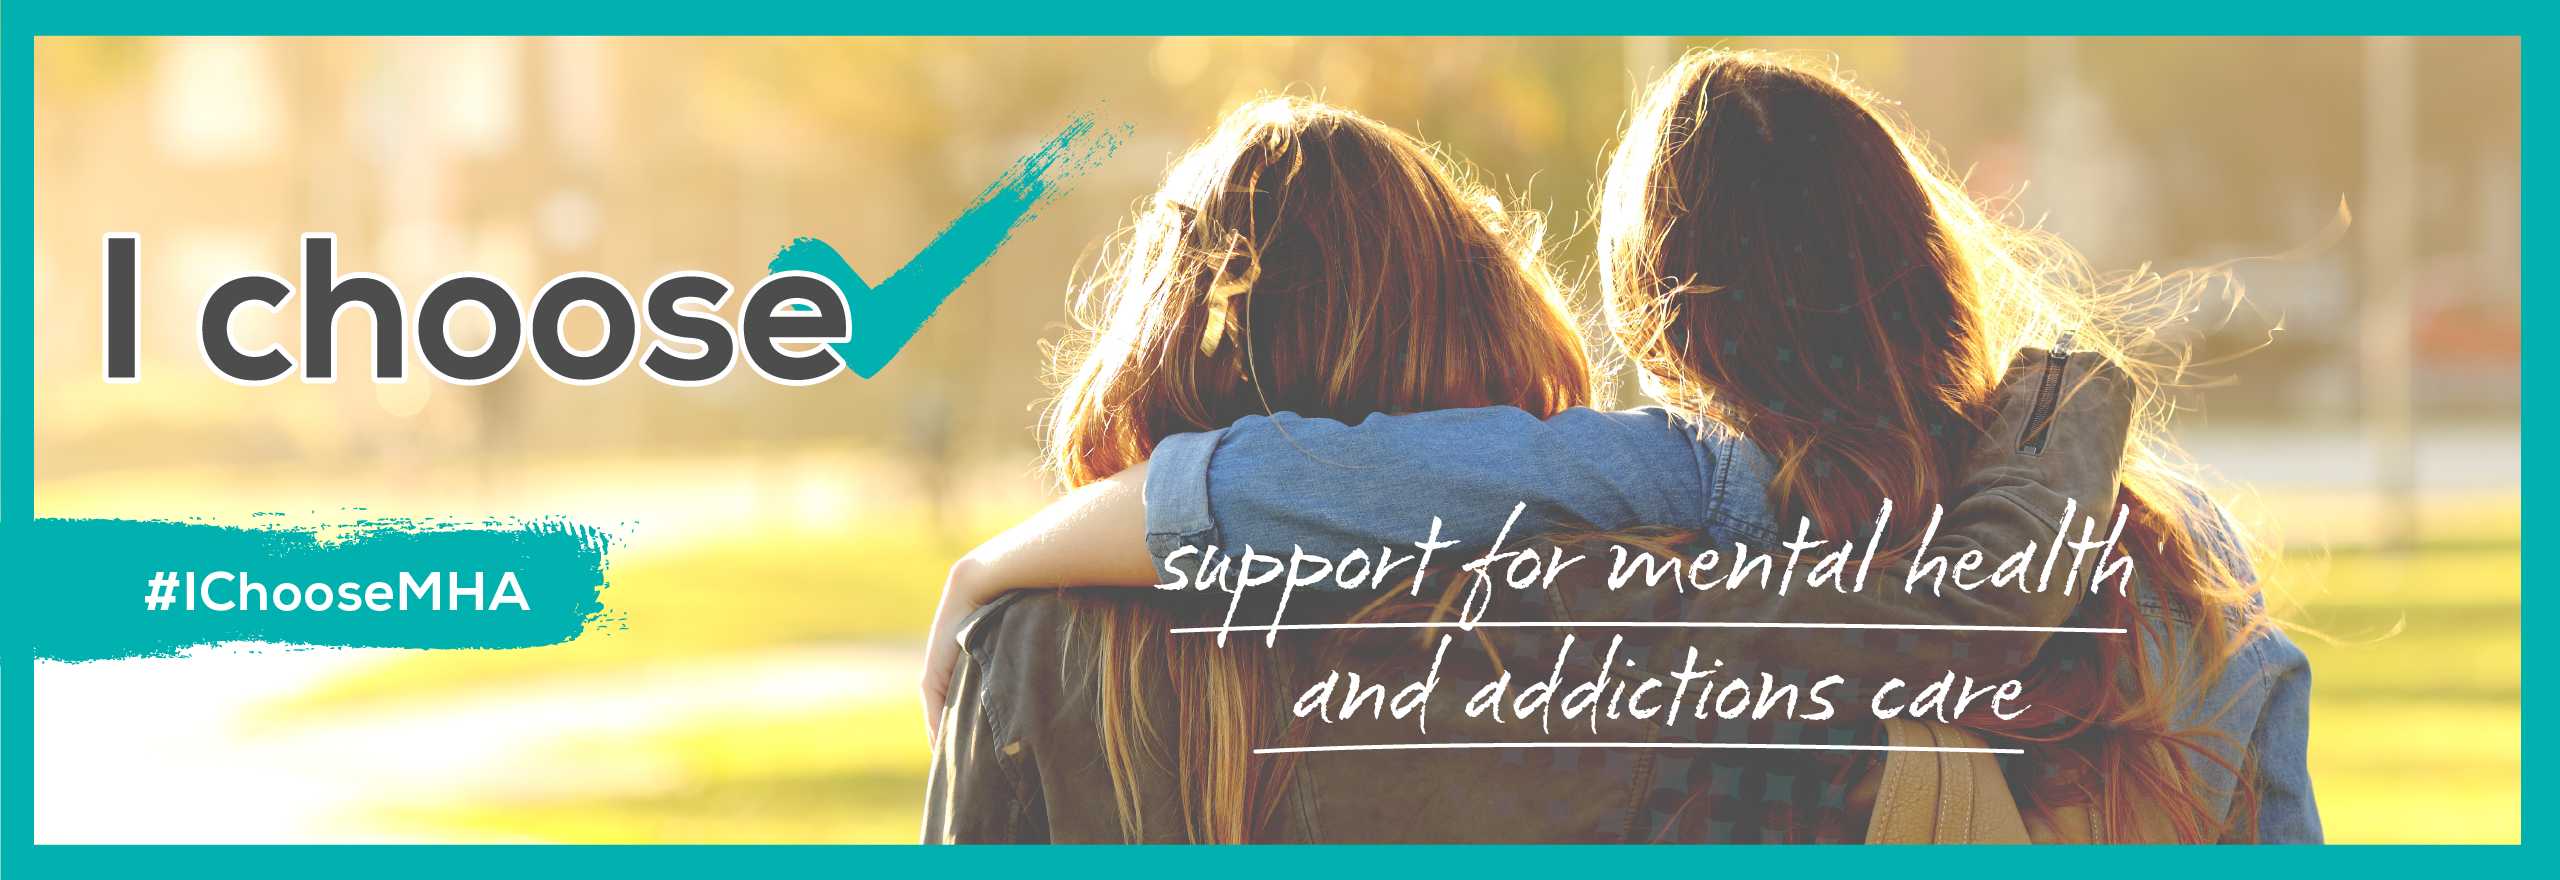 CMHA election monitor: Supporting mental health, addiction workers strengthens care for all Ontarians